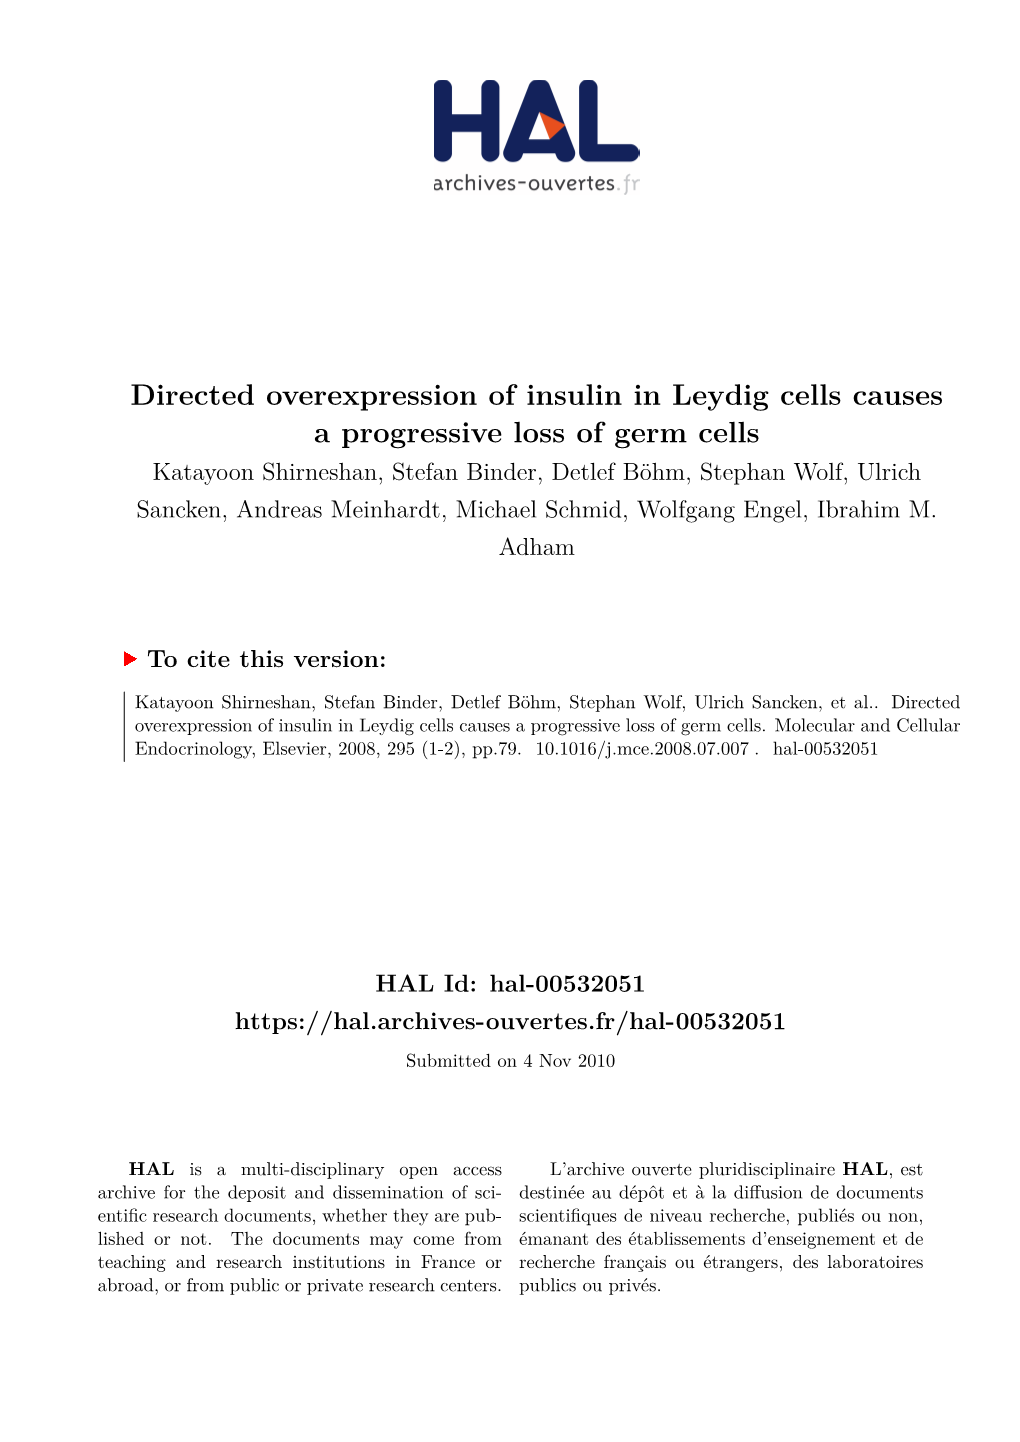 Directed Overexpression of Insulin in Leydig Cells Causes a Progressive